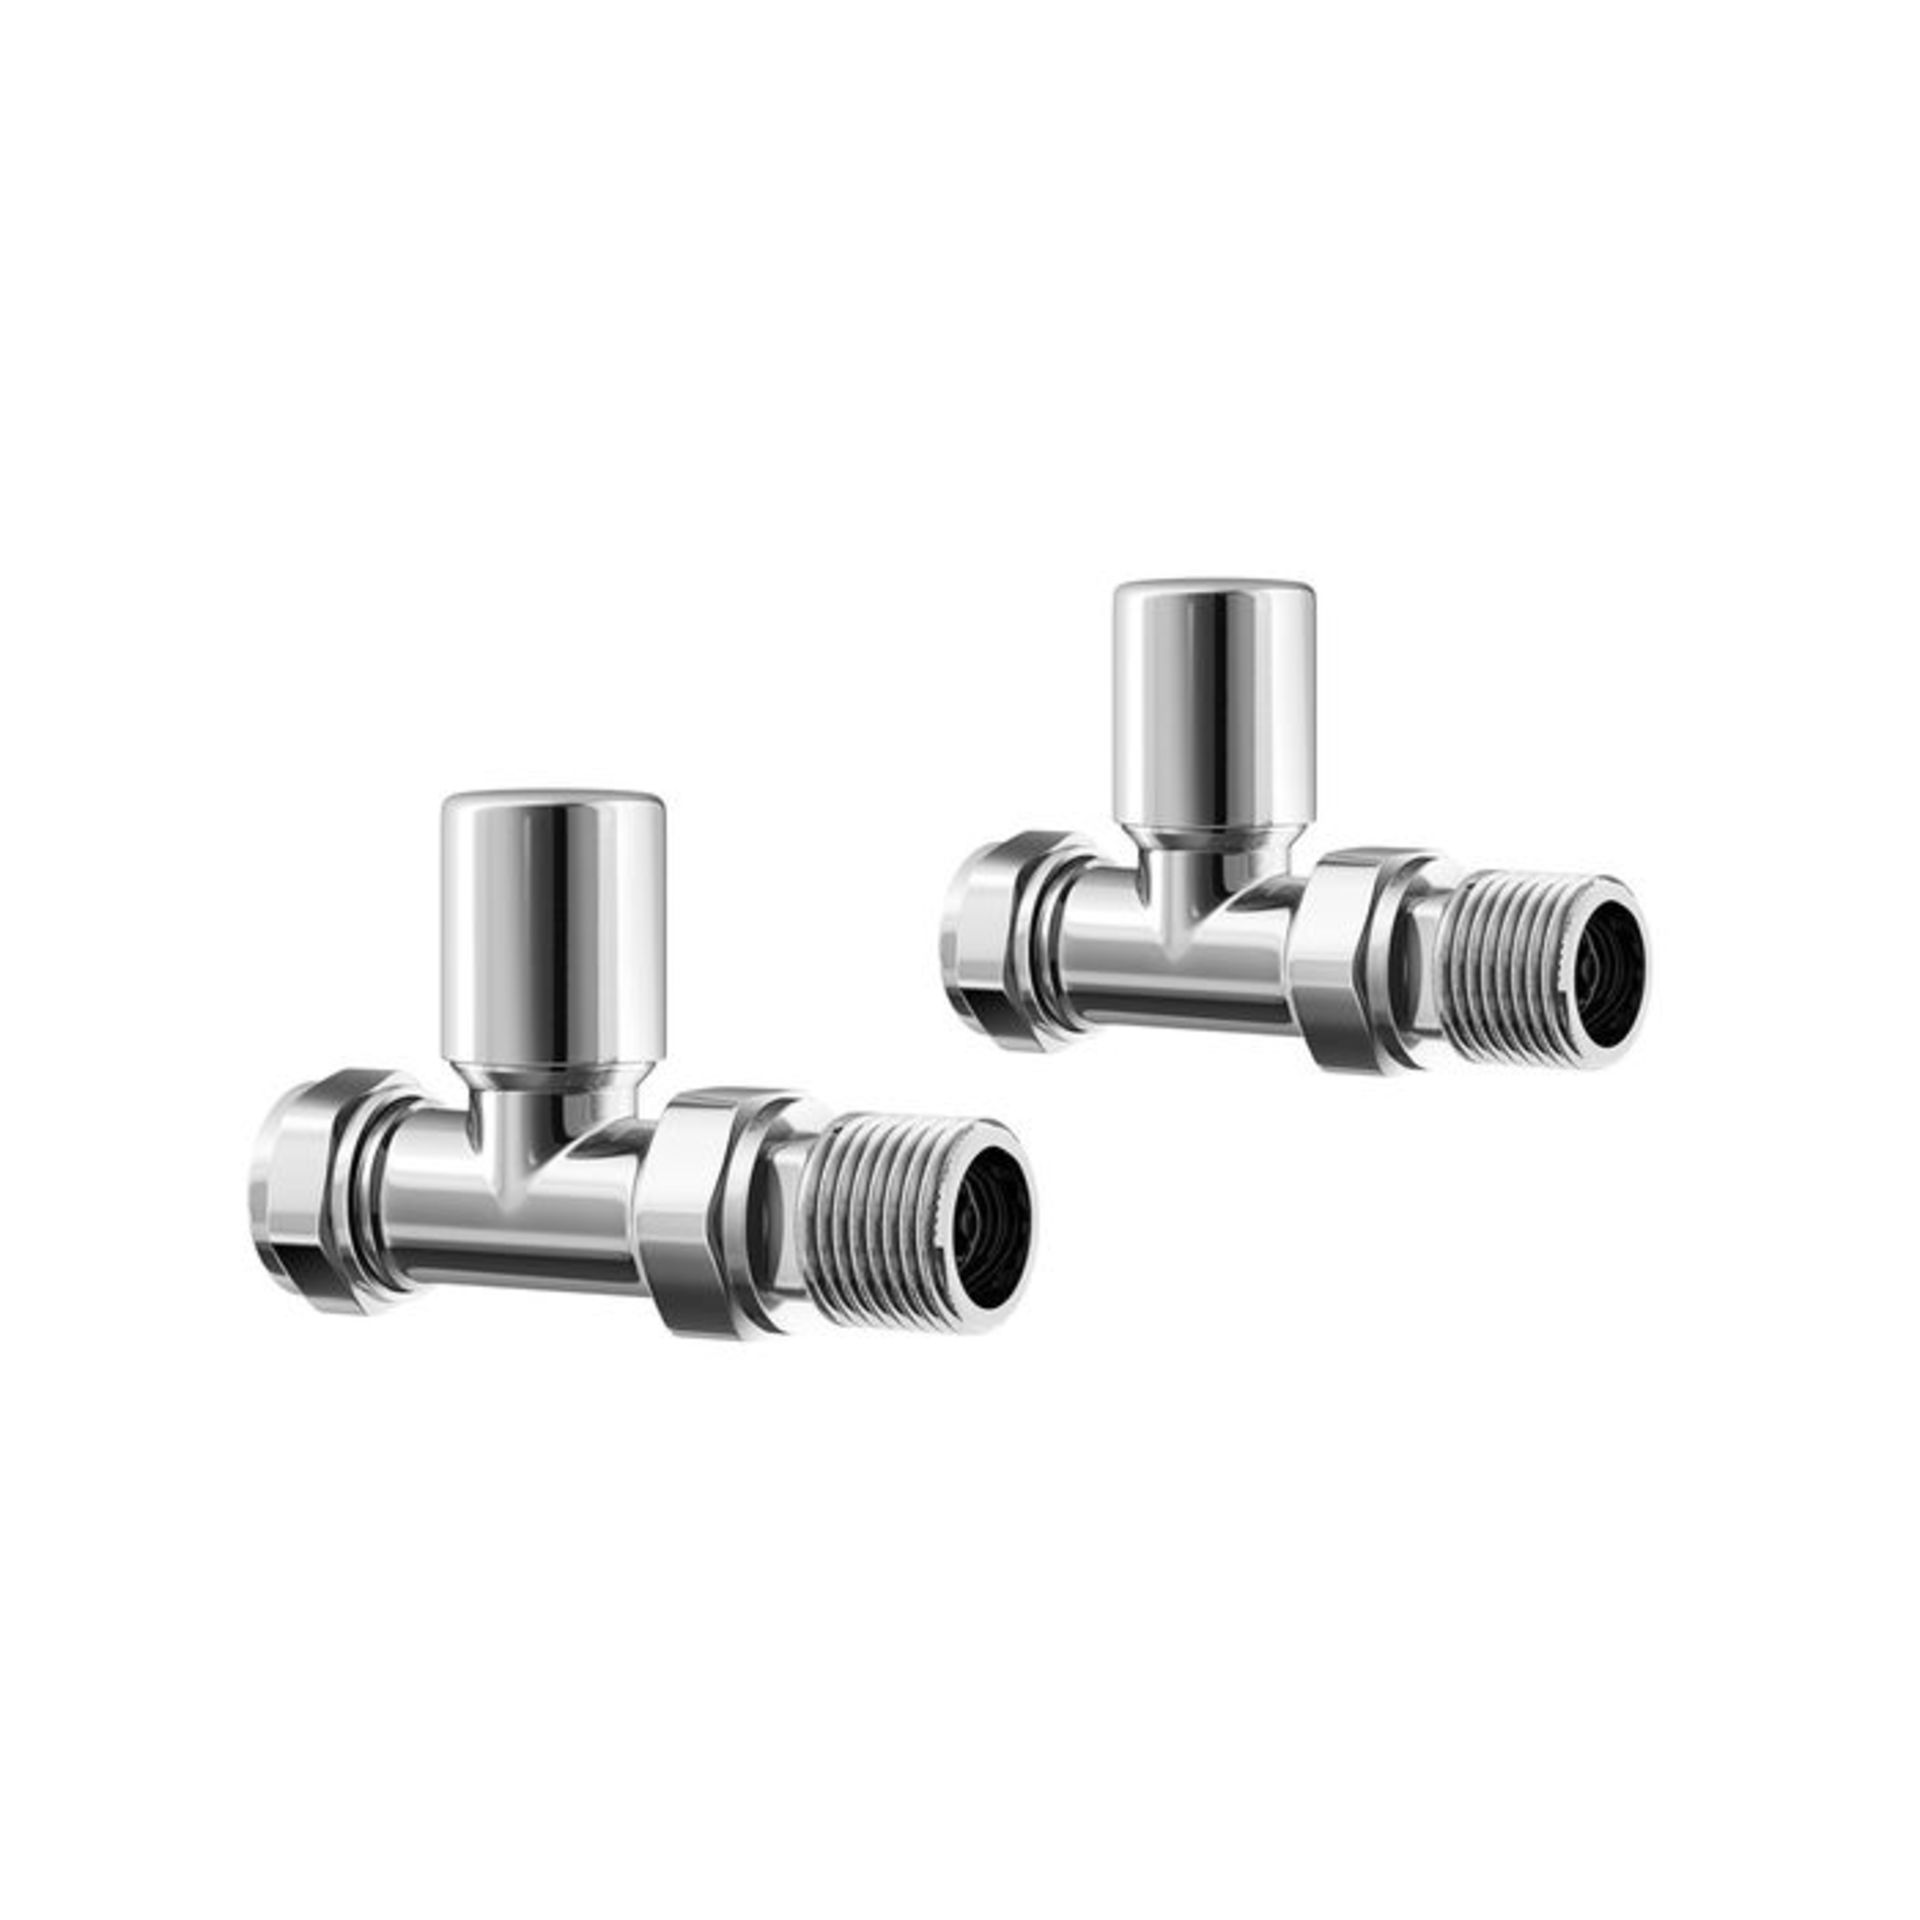 (D1041) Standard 15mm Connection Straight Chrome Radiator Valves Chrome Plated Solid Brass St... - Image 2 of 2